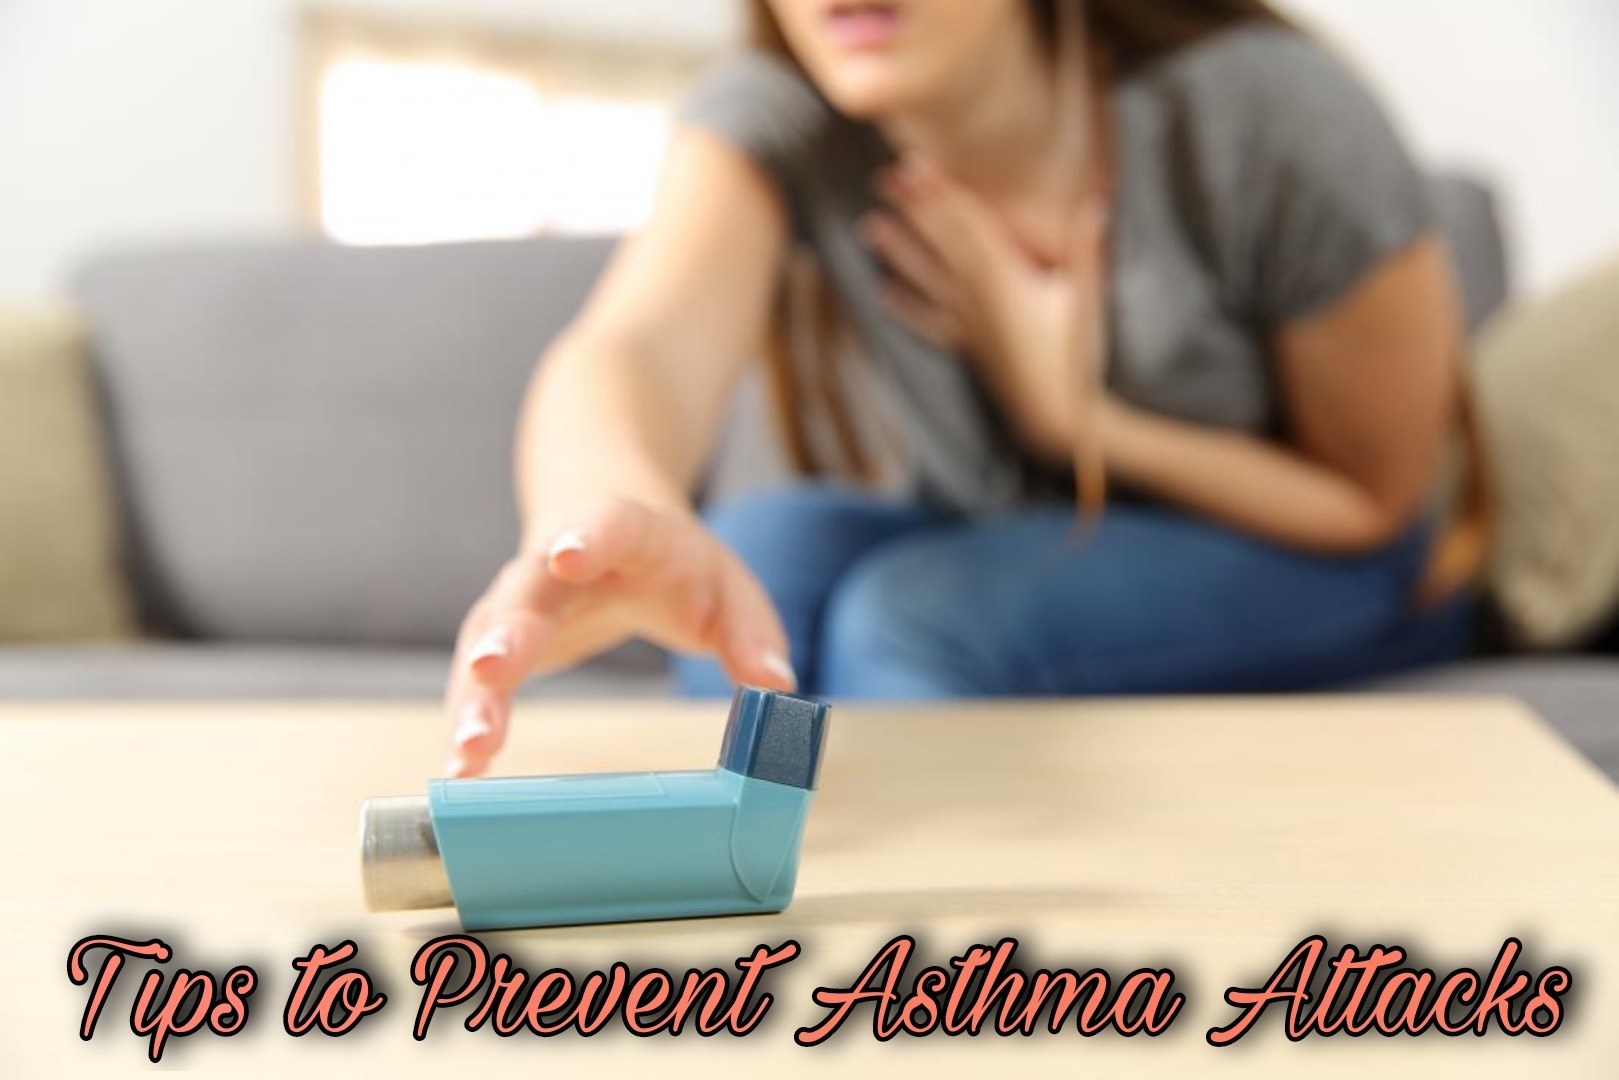 Ways to prevent asthma attacks